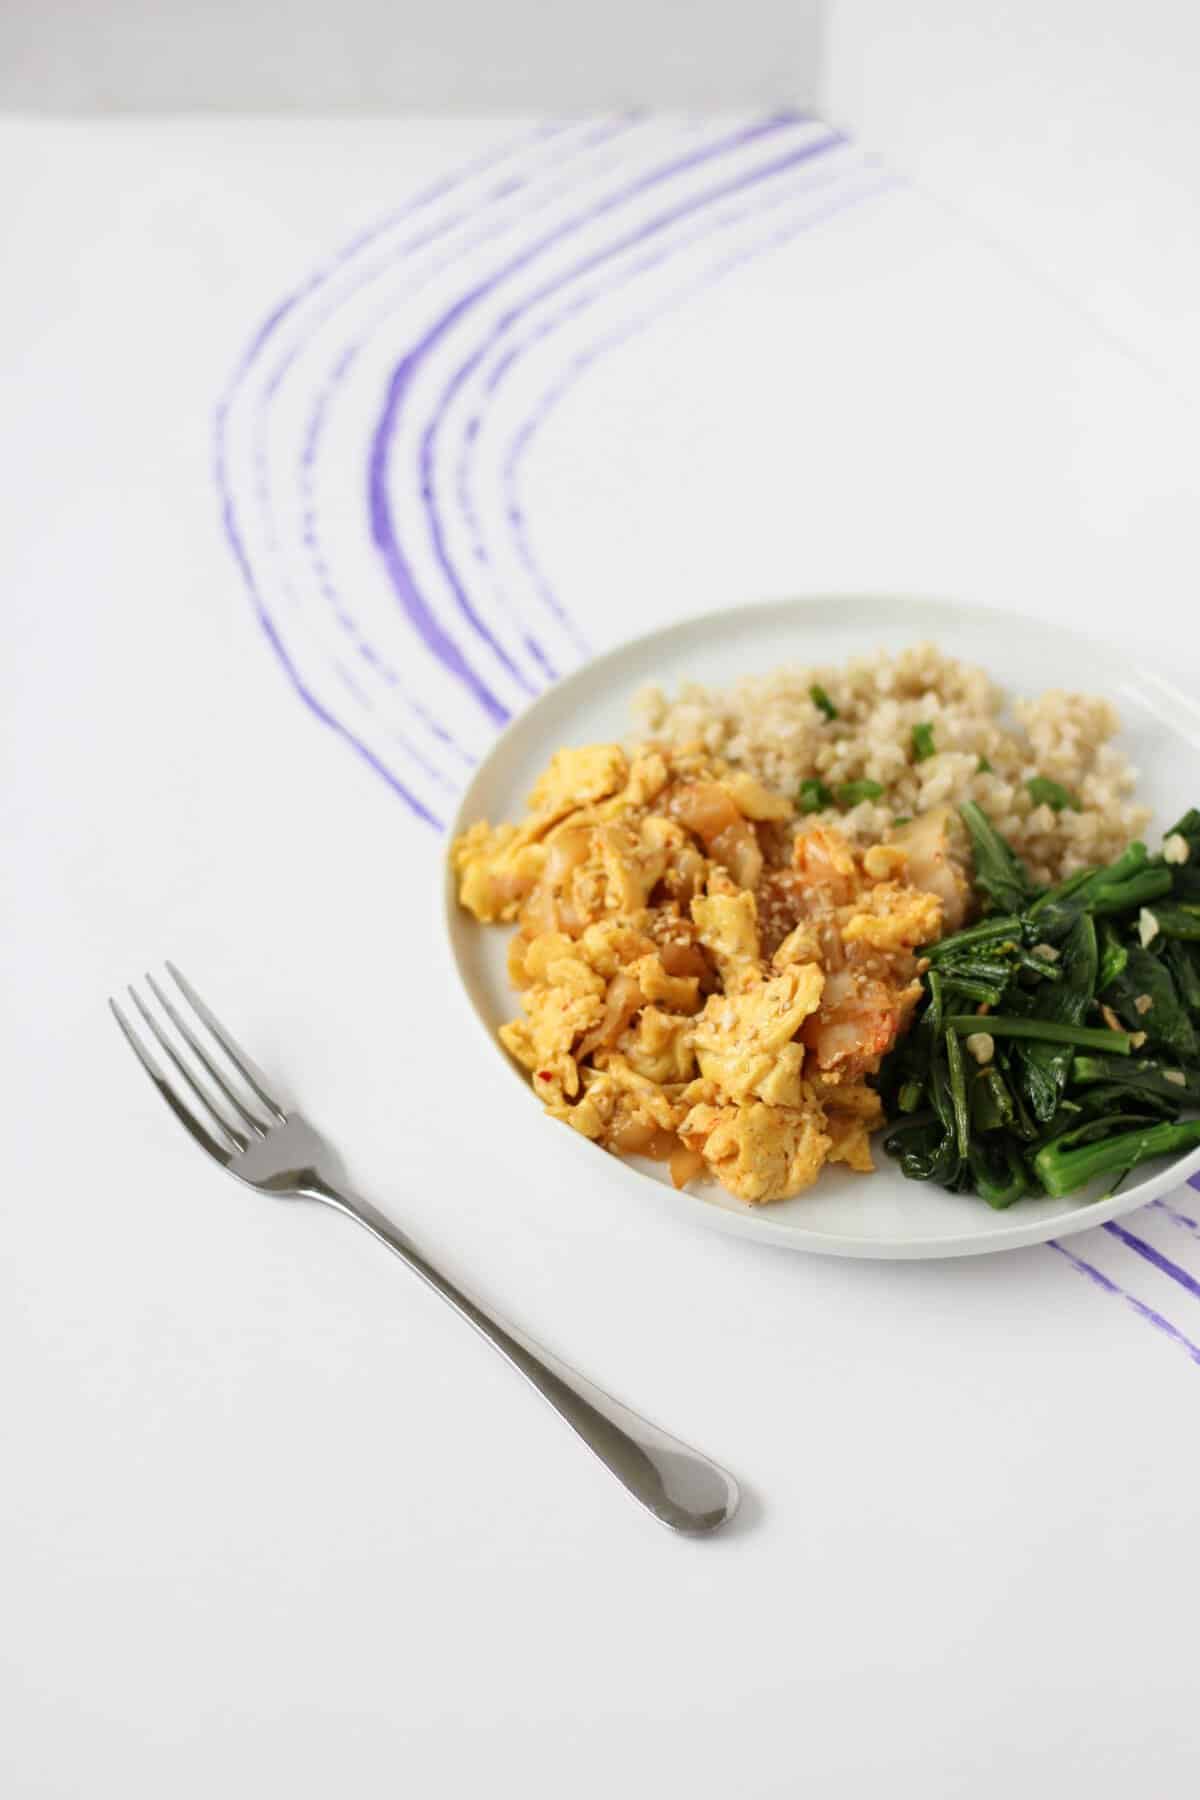 White plate with steamed rice, kimchi and scrambled eggs, and sauteed greens.